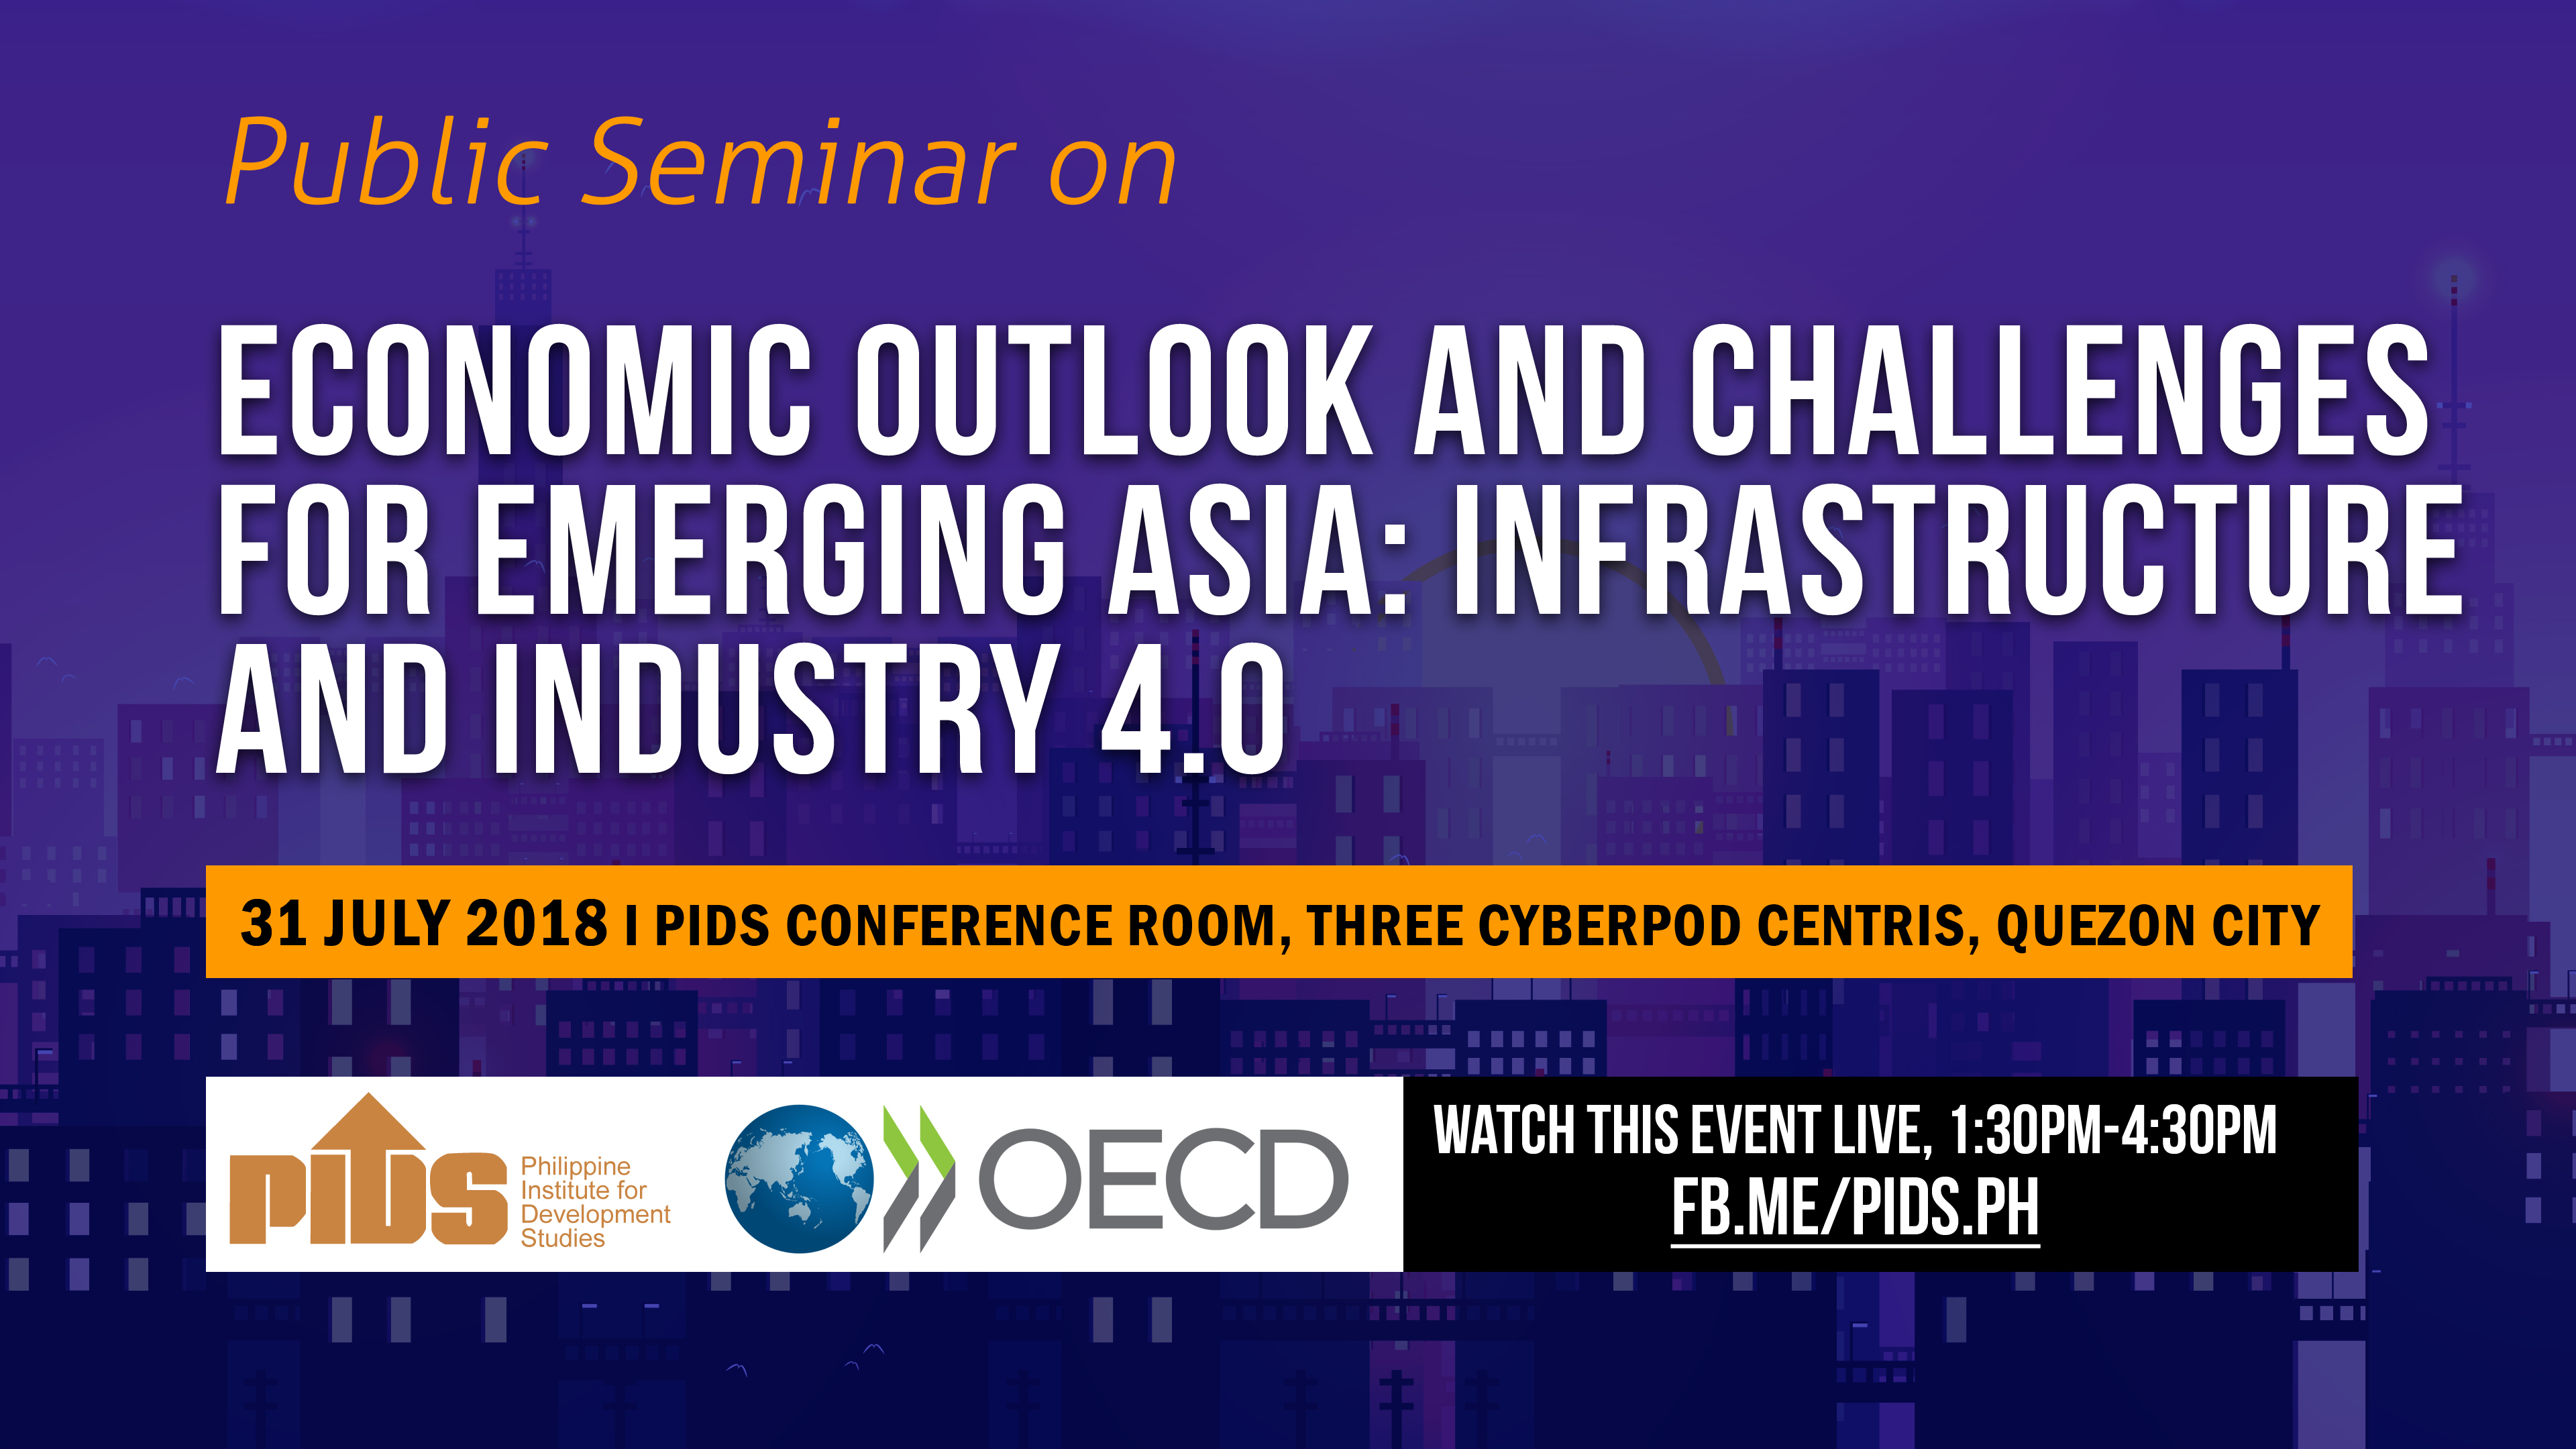 Economic Outlook and Challenges for Emerging Asia: Infrastructure and Industry 4.0-pids-oecd-0-20180731.jpg